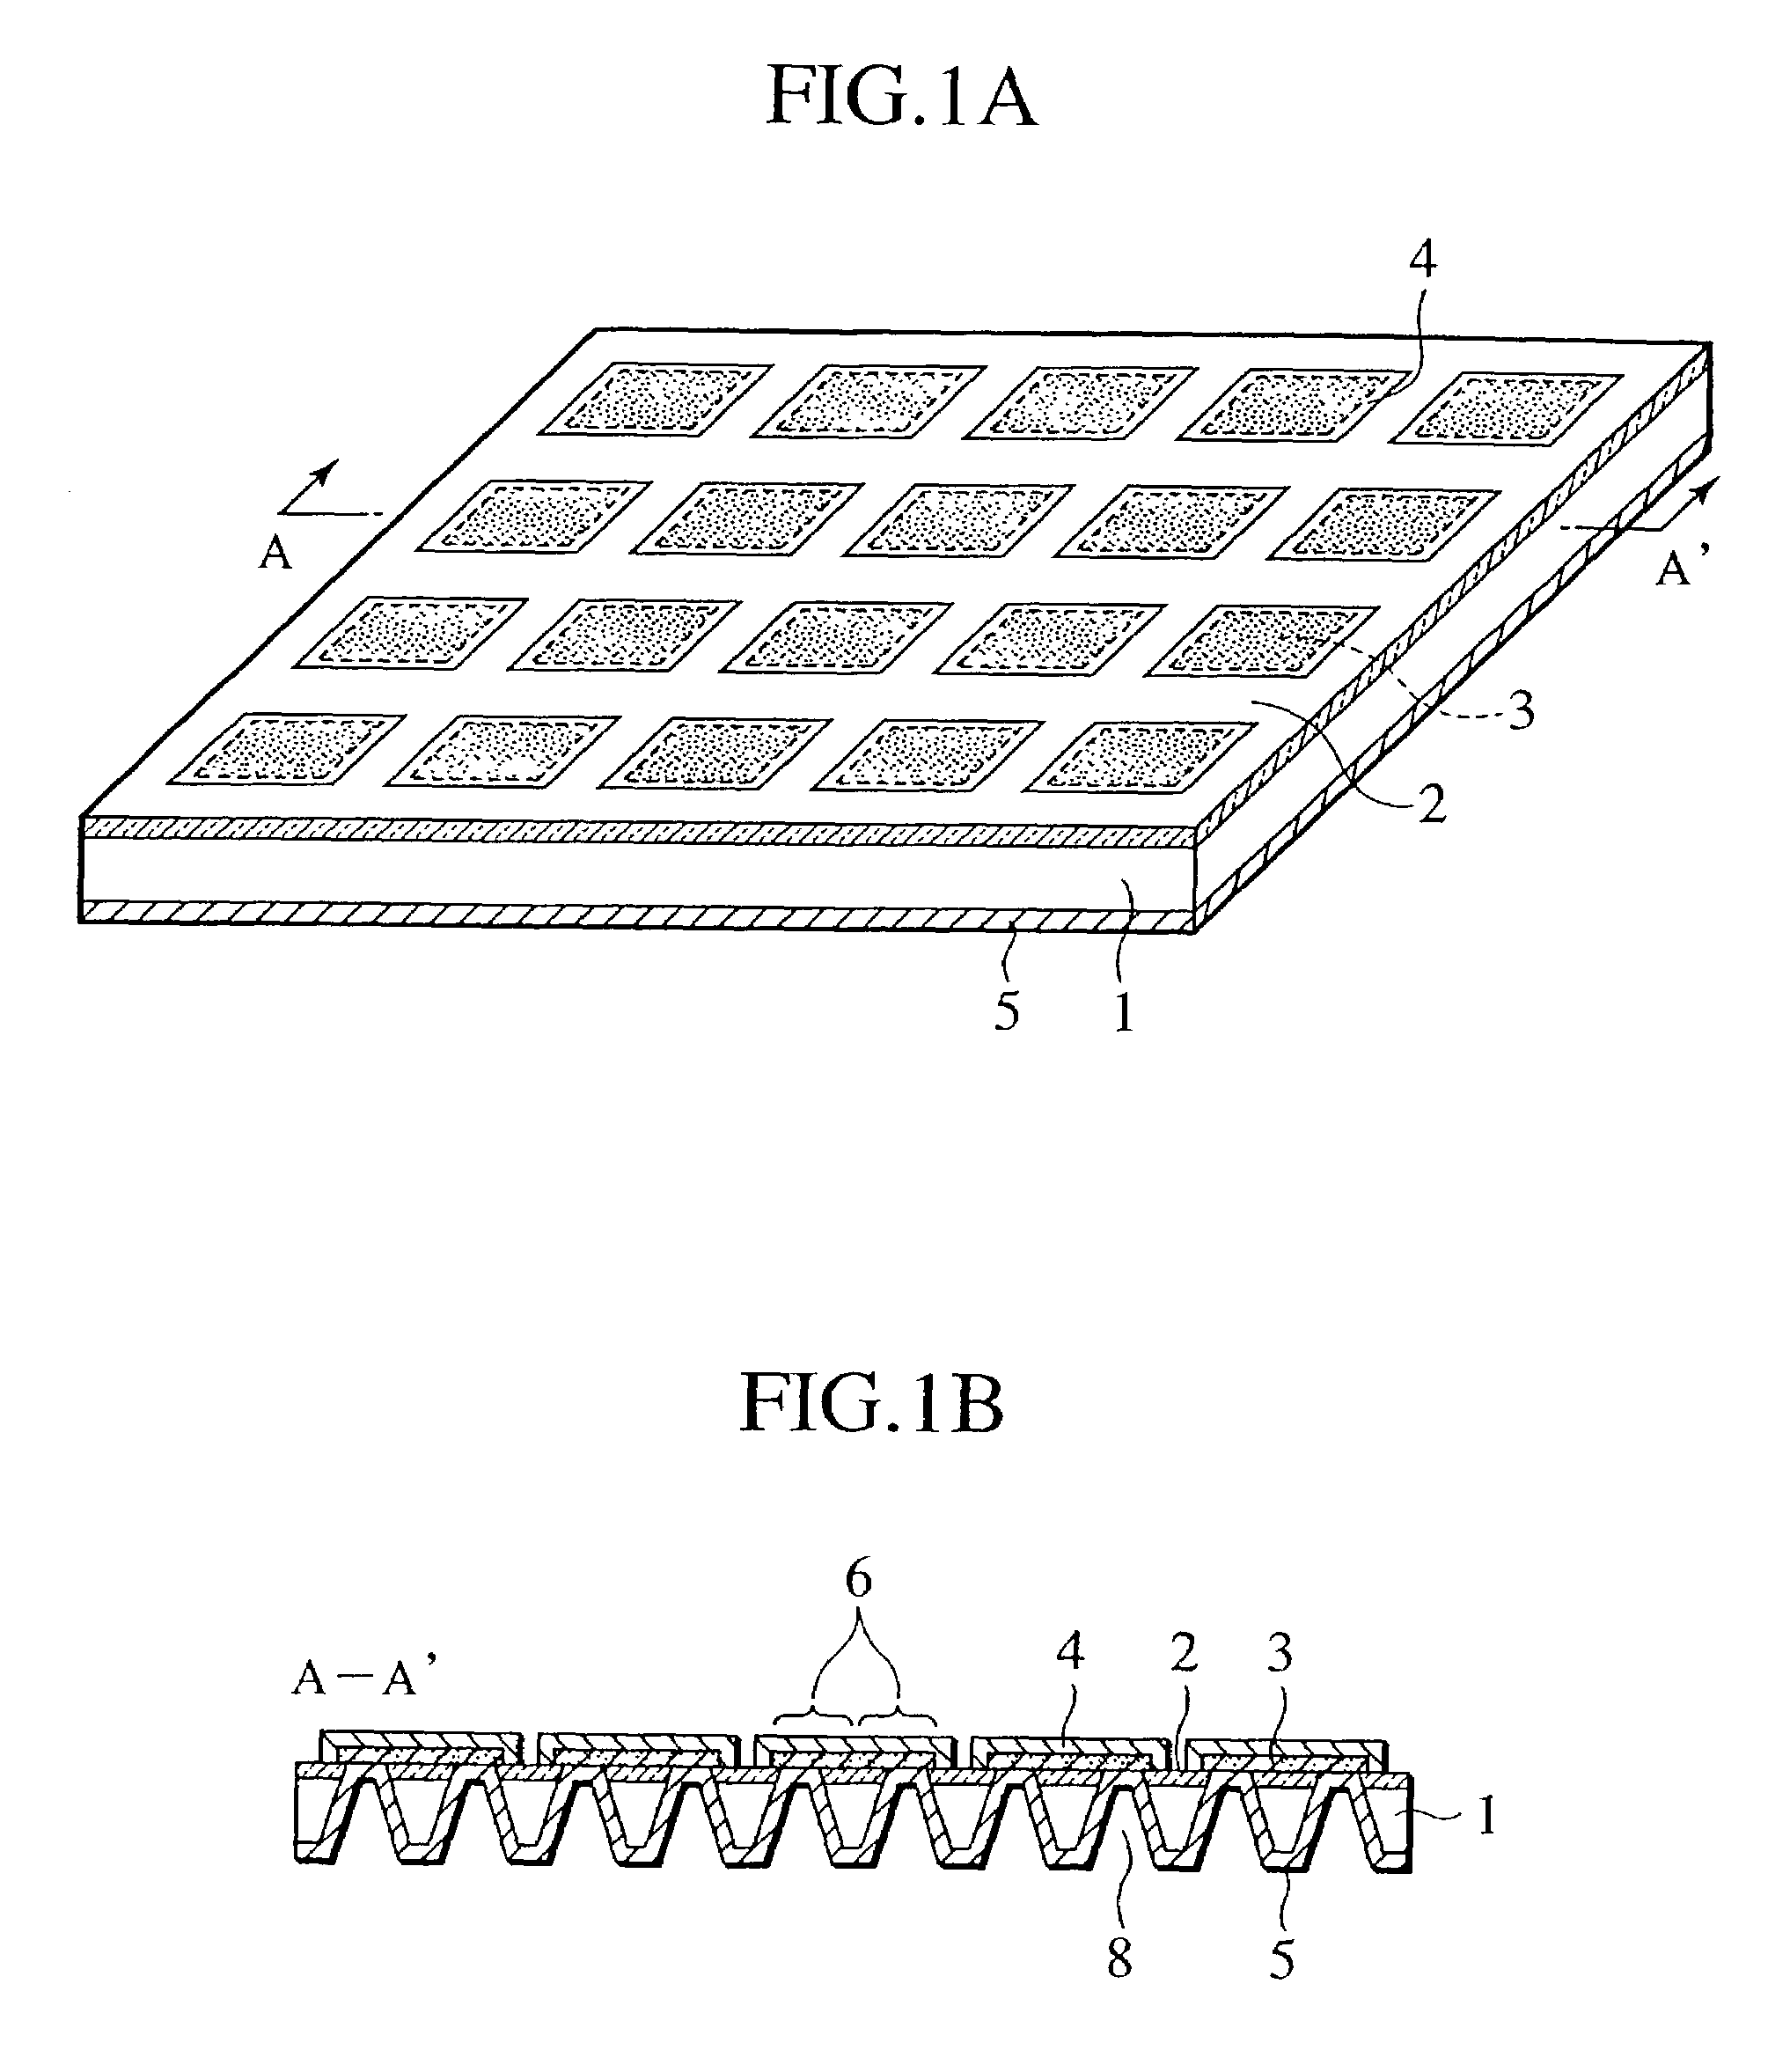 Single cell for fuel cell and solid oxide fuel cell